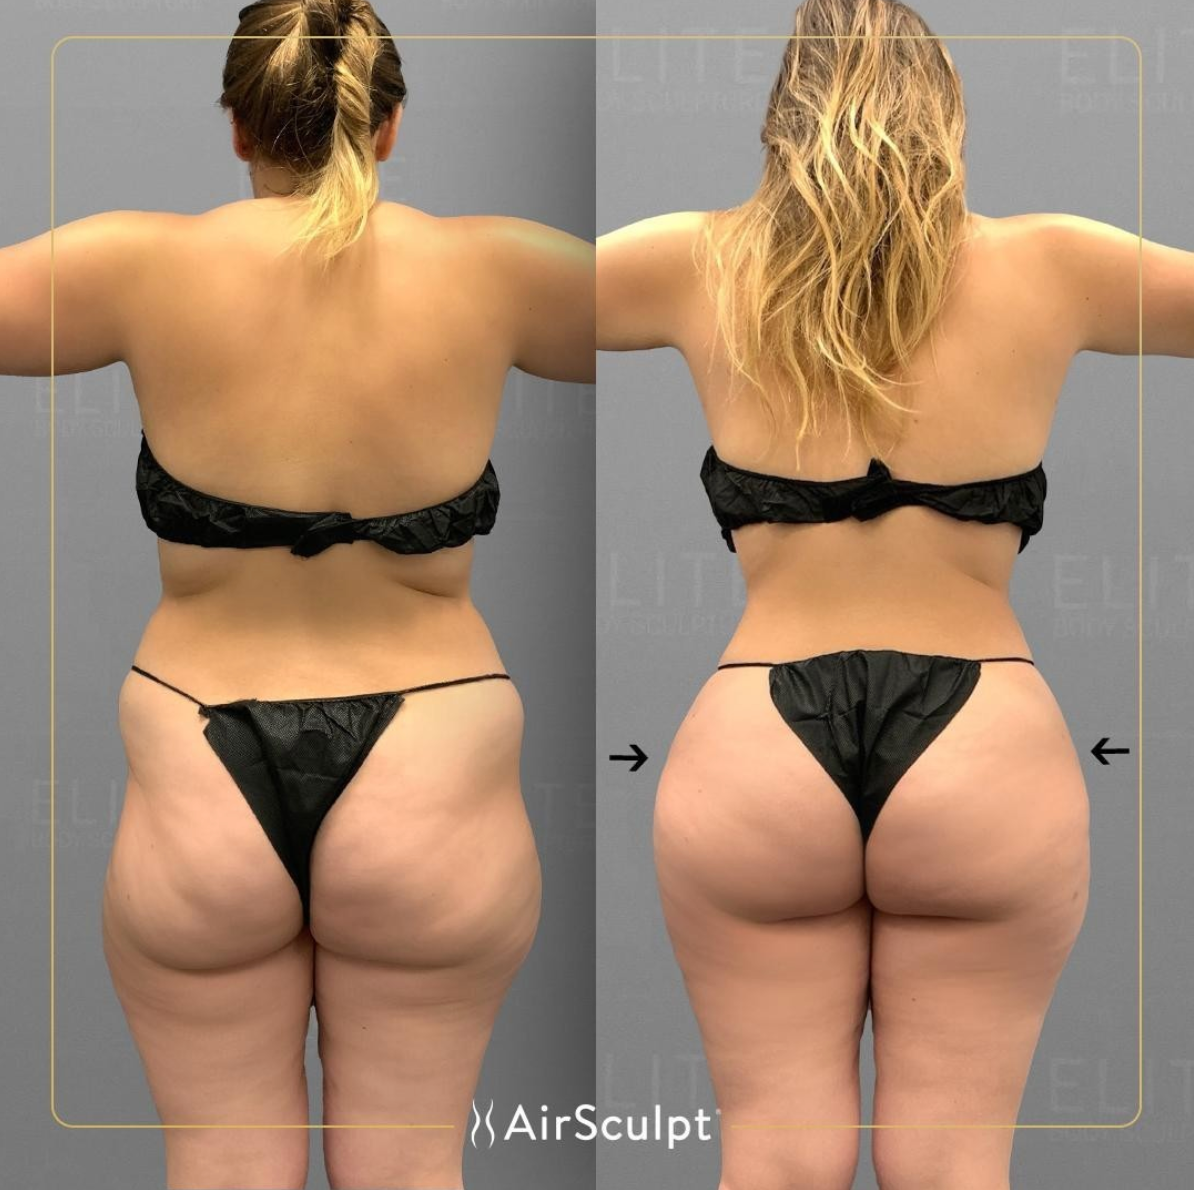 How This AirSculpt® Patient Got A Flatter Stomach and Curvier Hips